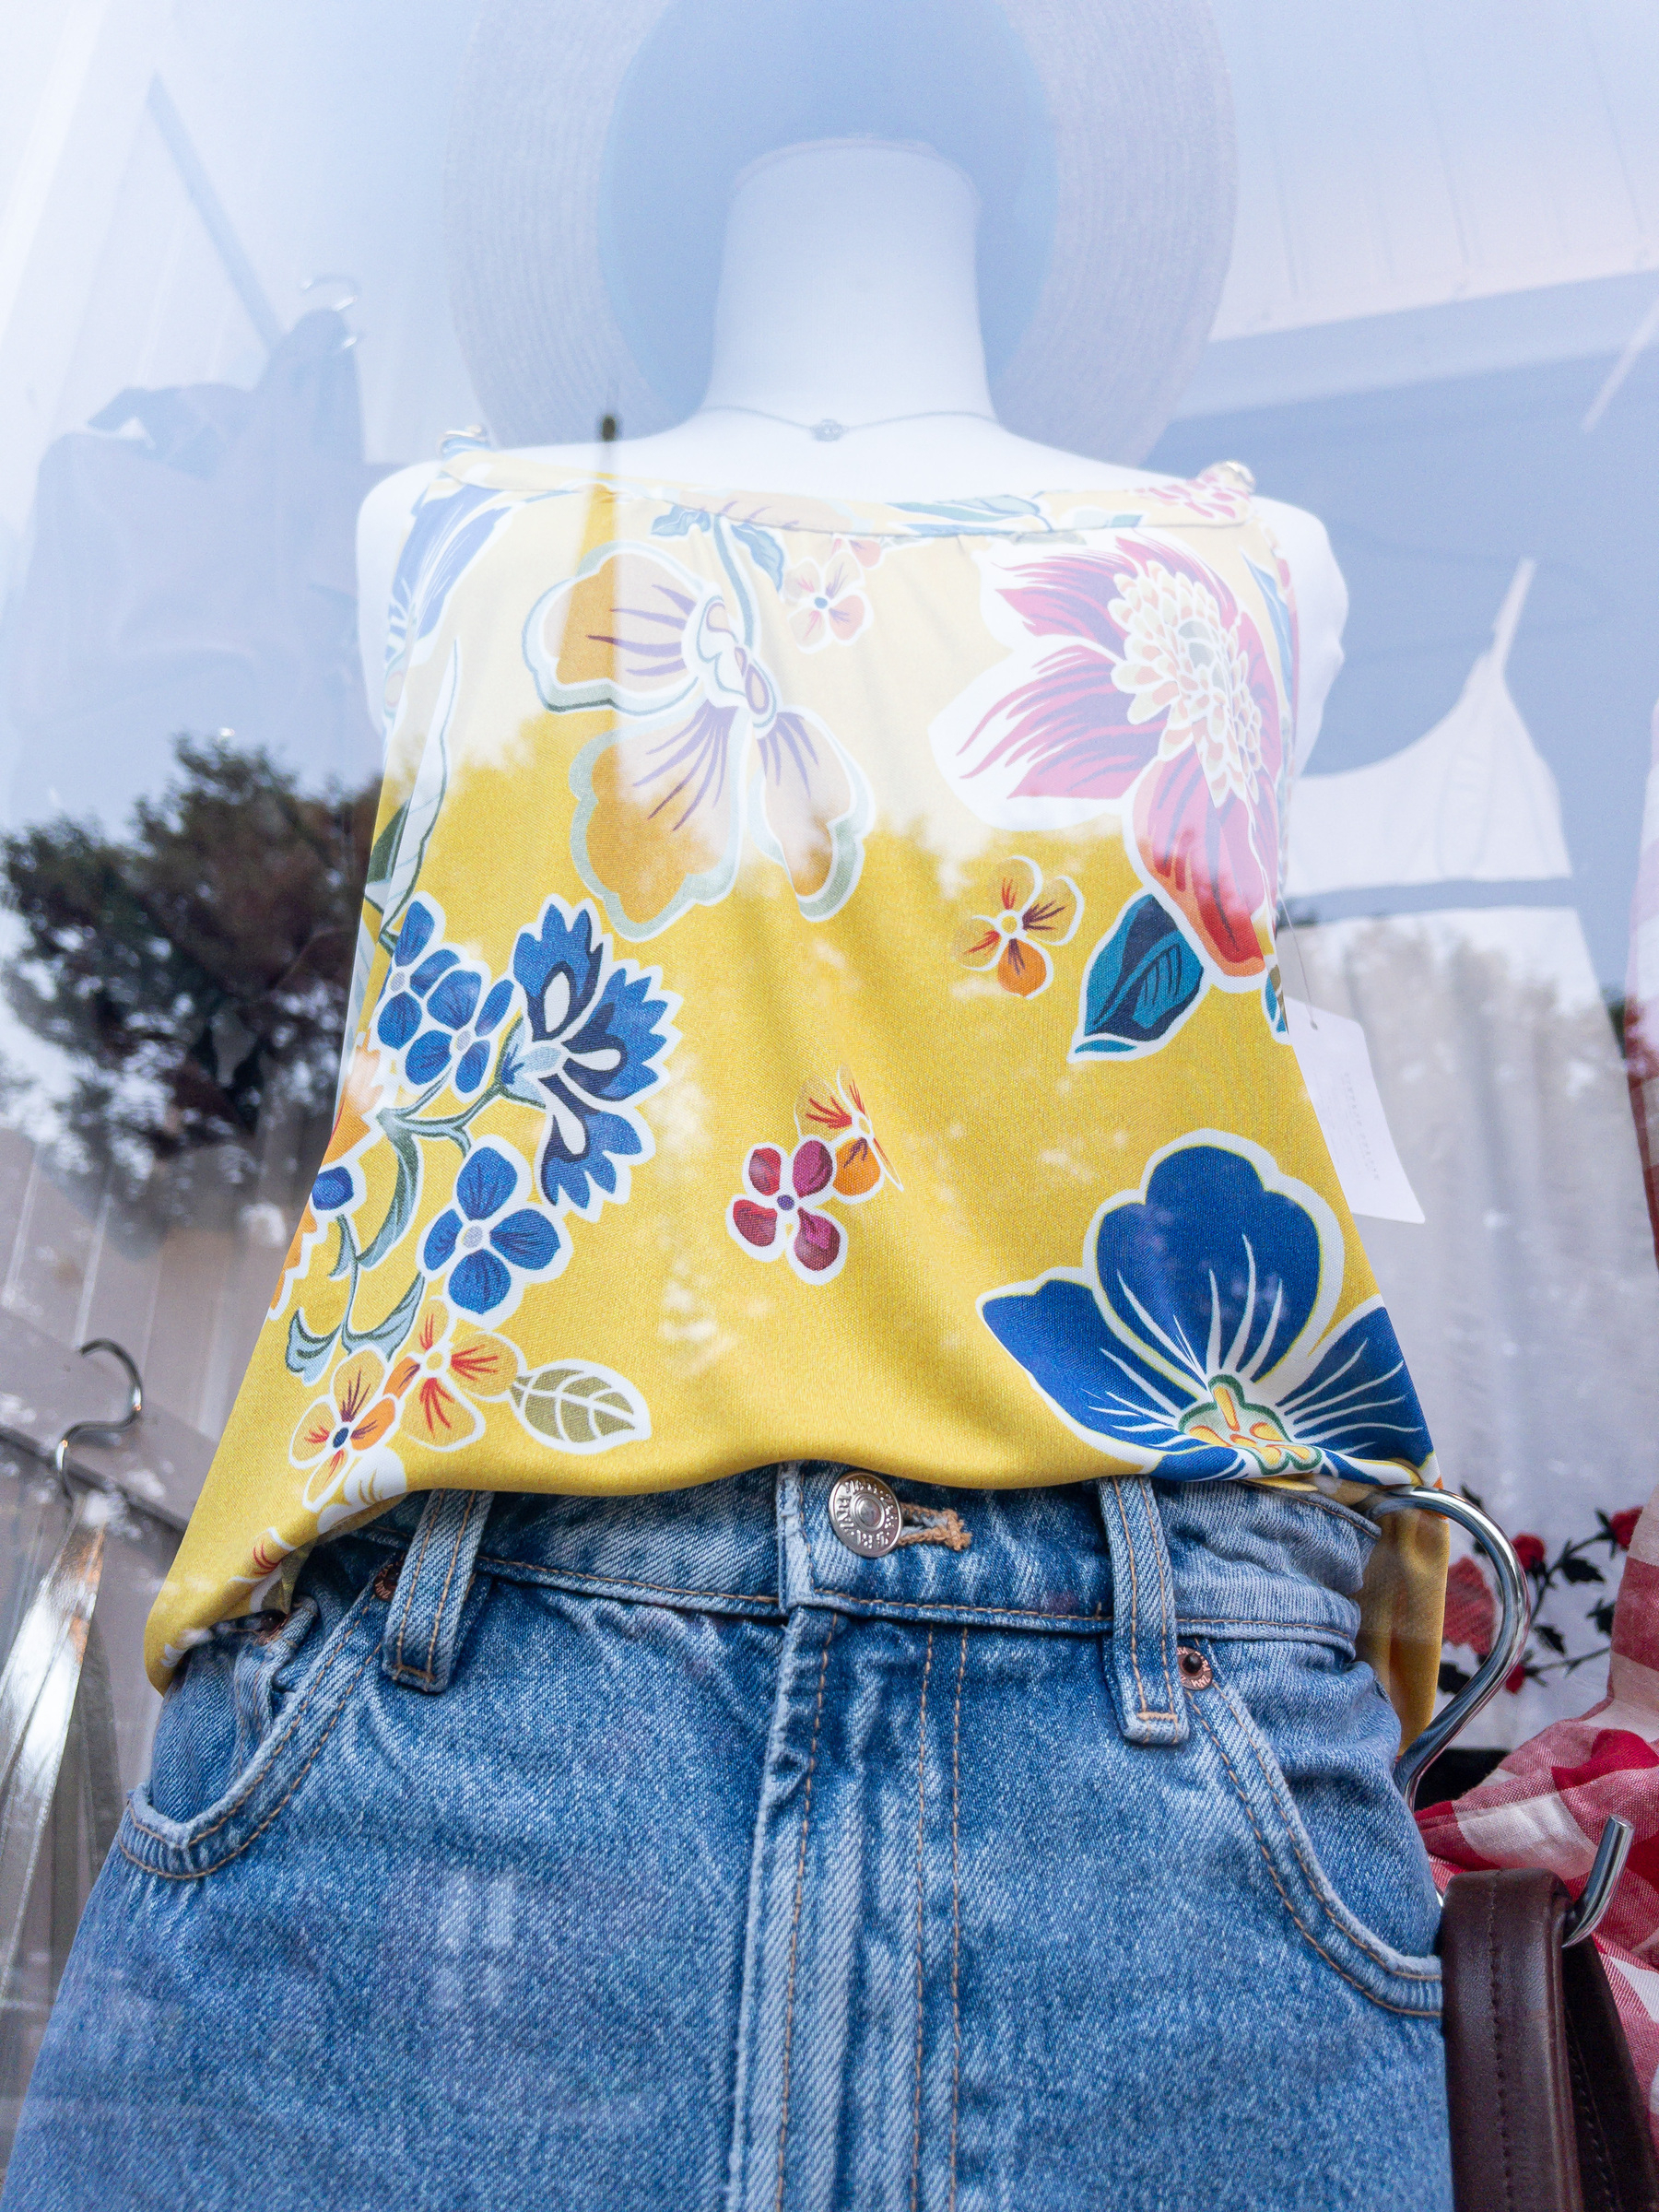 Blue and yellow halter top, blue jeans, hat on a mannequin in a shop window.